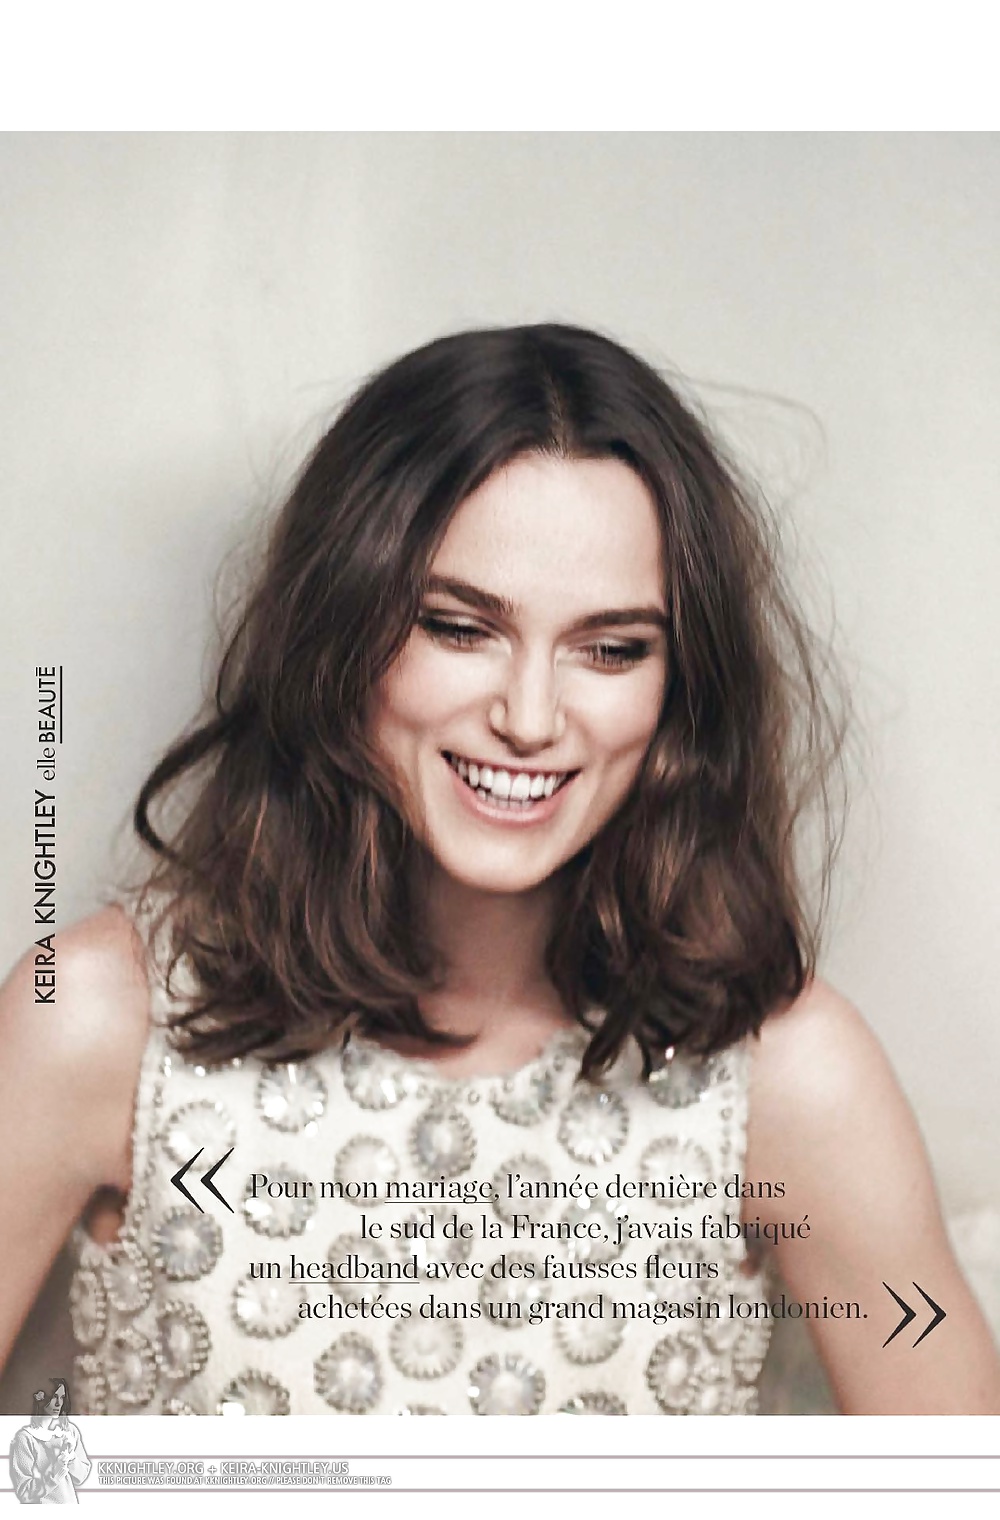 Keira Knightley The Royal Lady of England #35649668